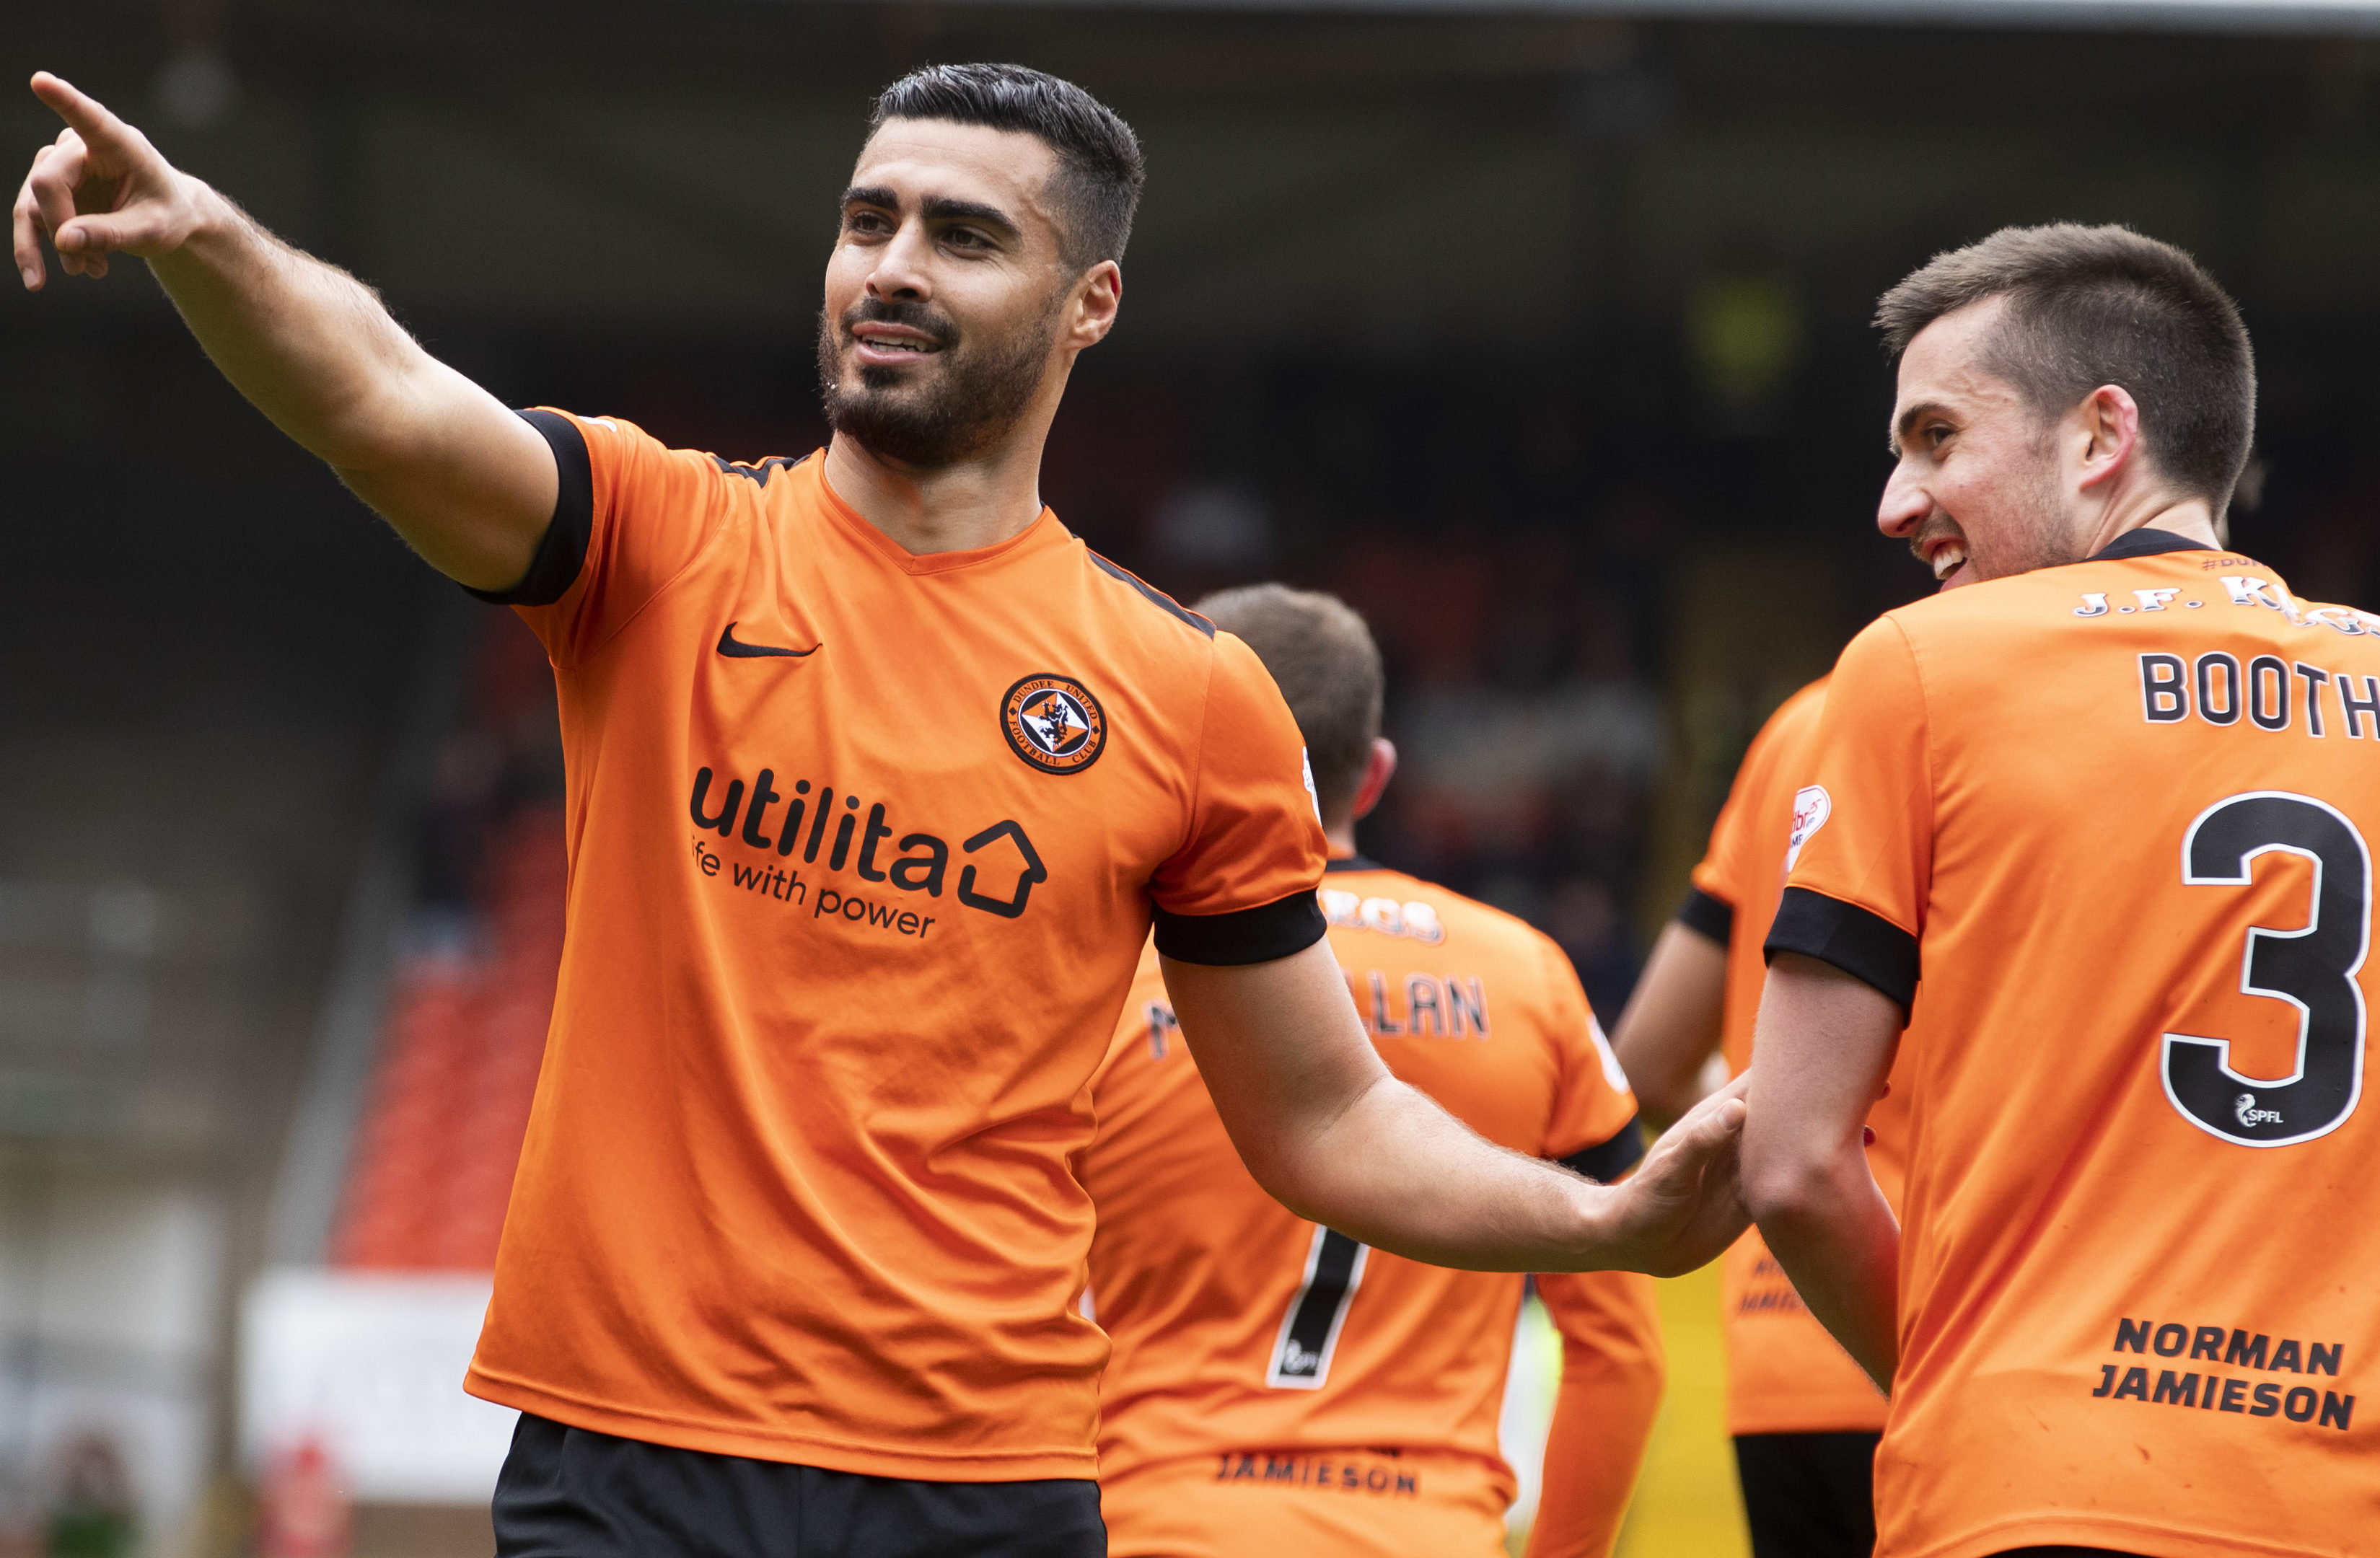 Rachid Bouhenna and Callum Booth will be leaving Dundee United.